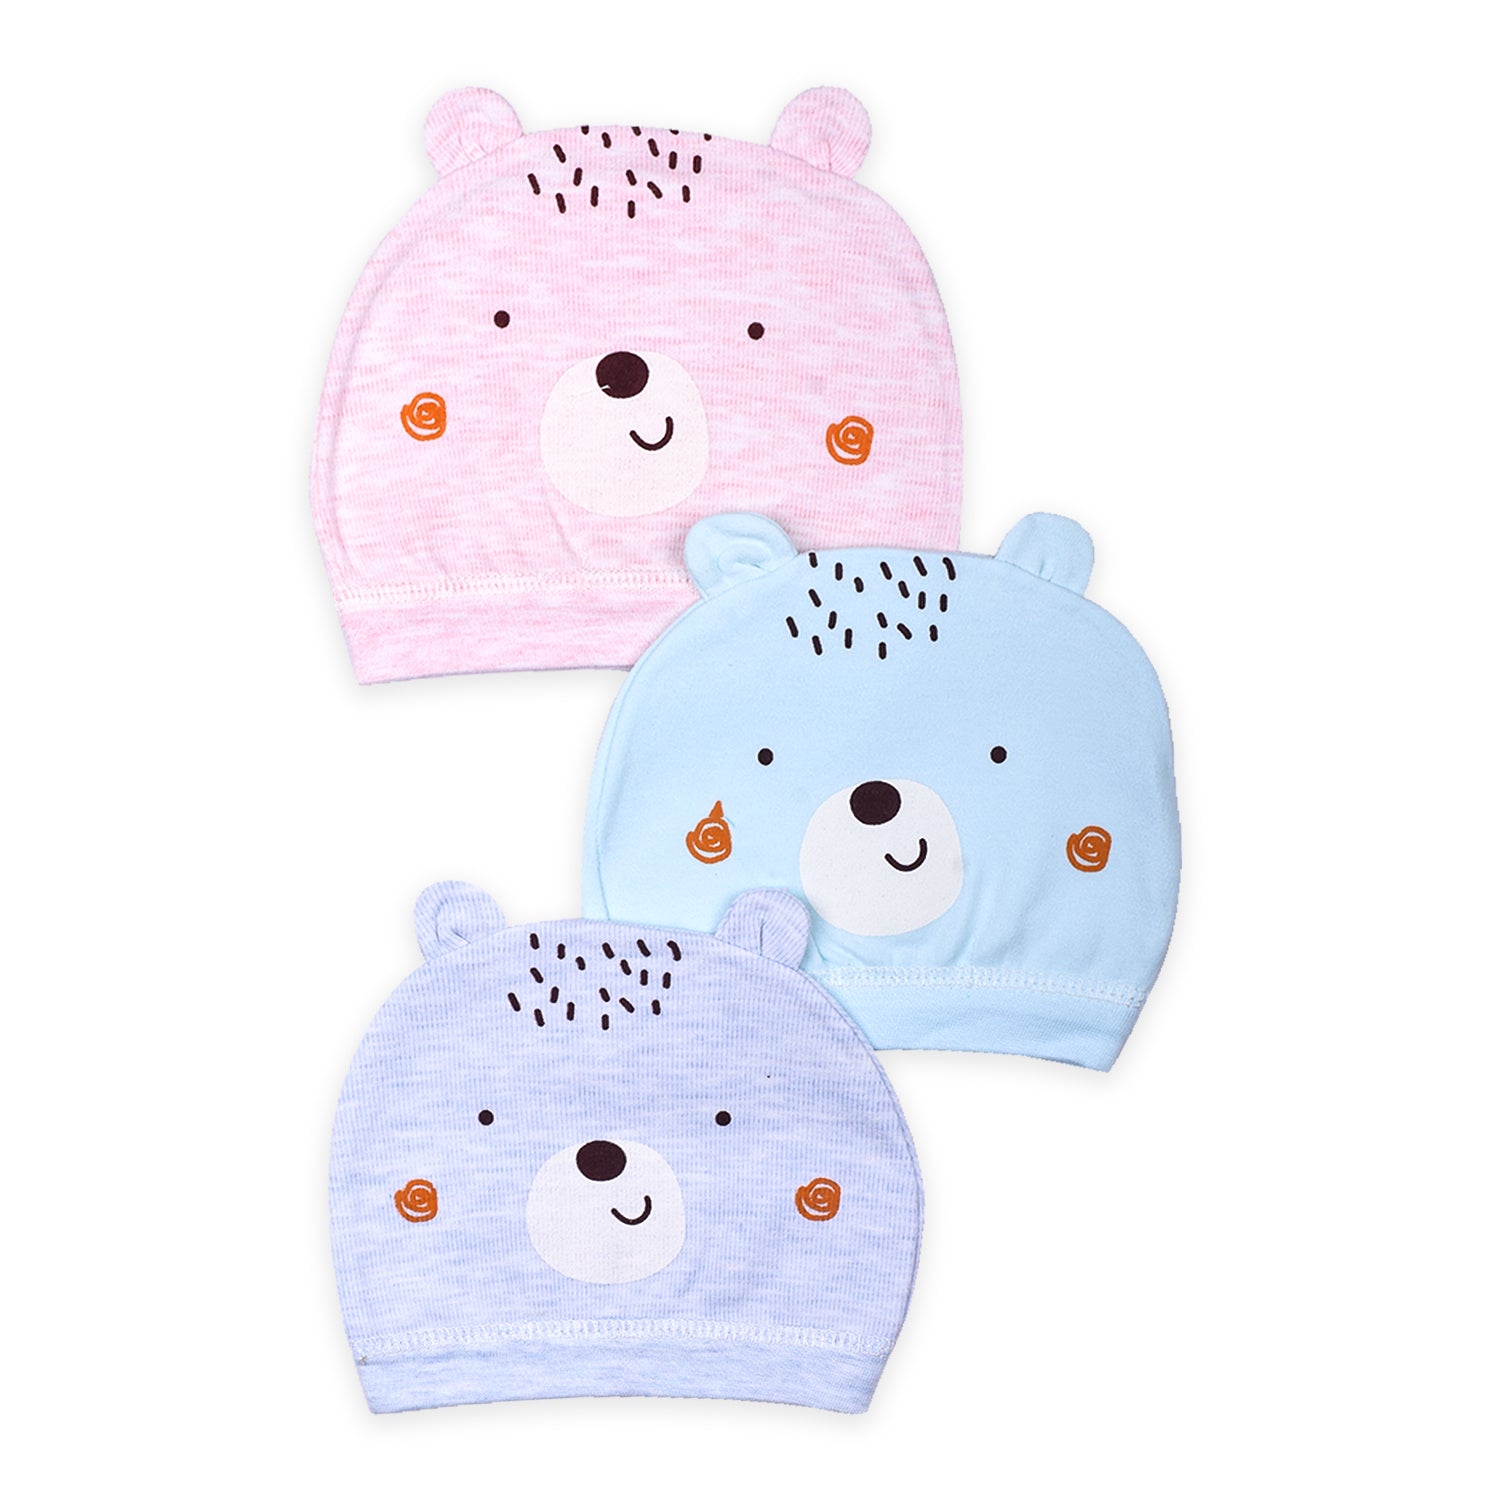 New Born Baby Caps - Pack of 3 - Multicolor